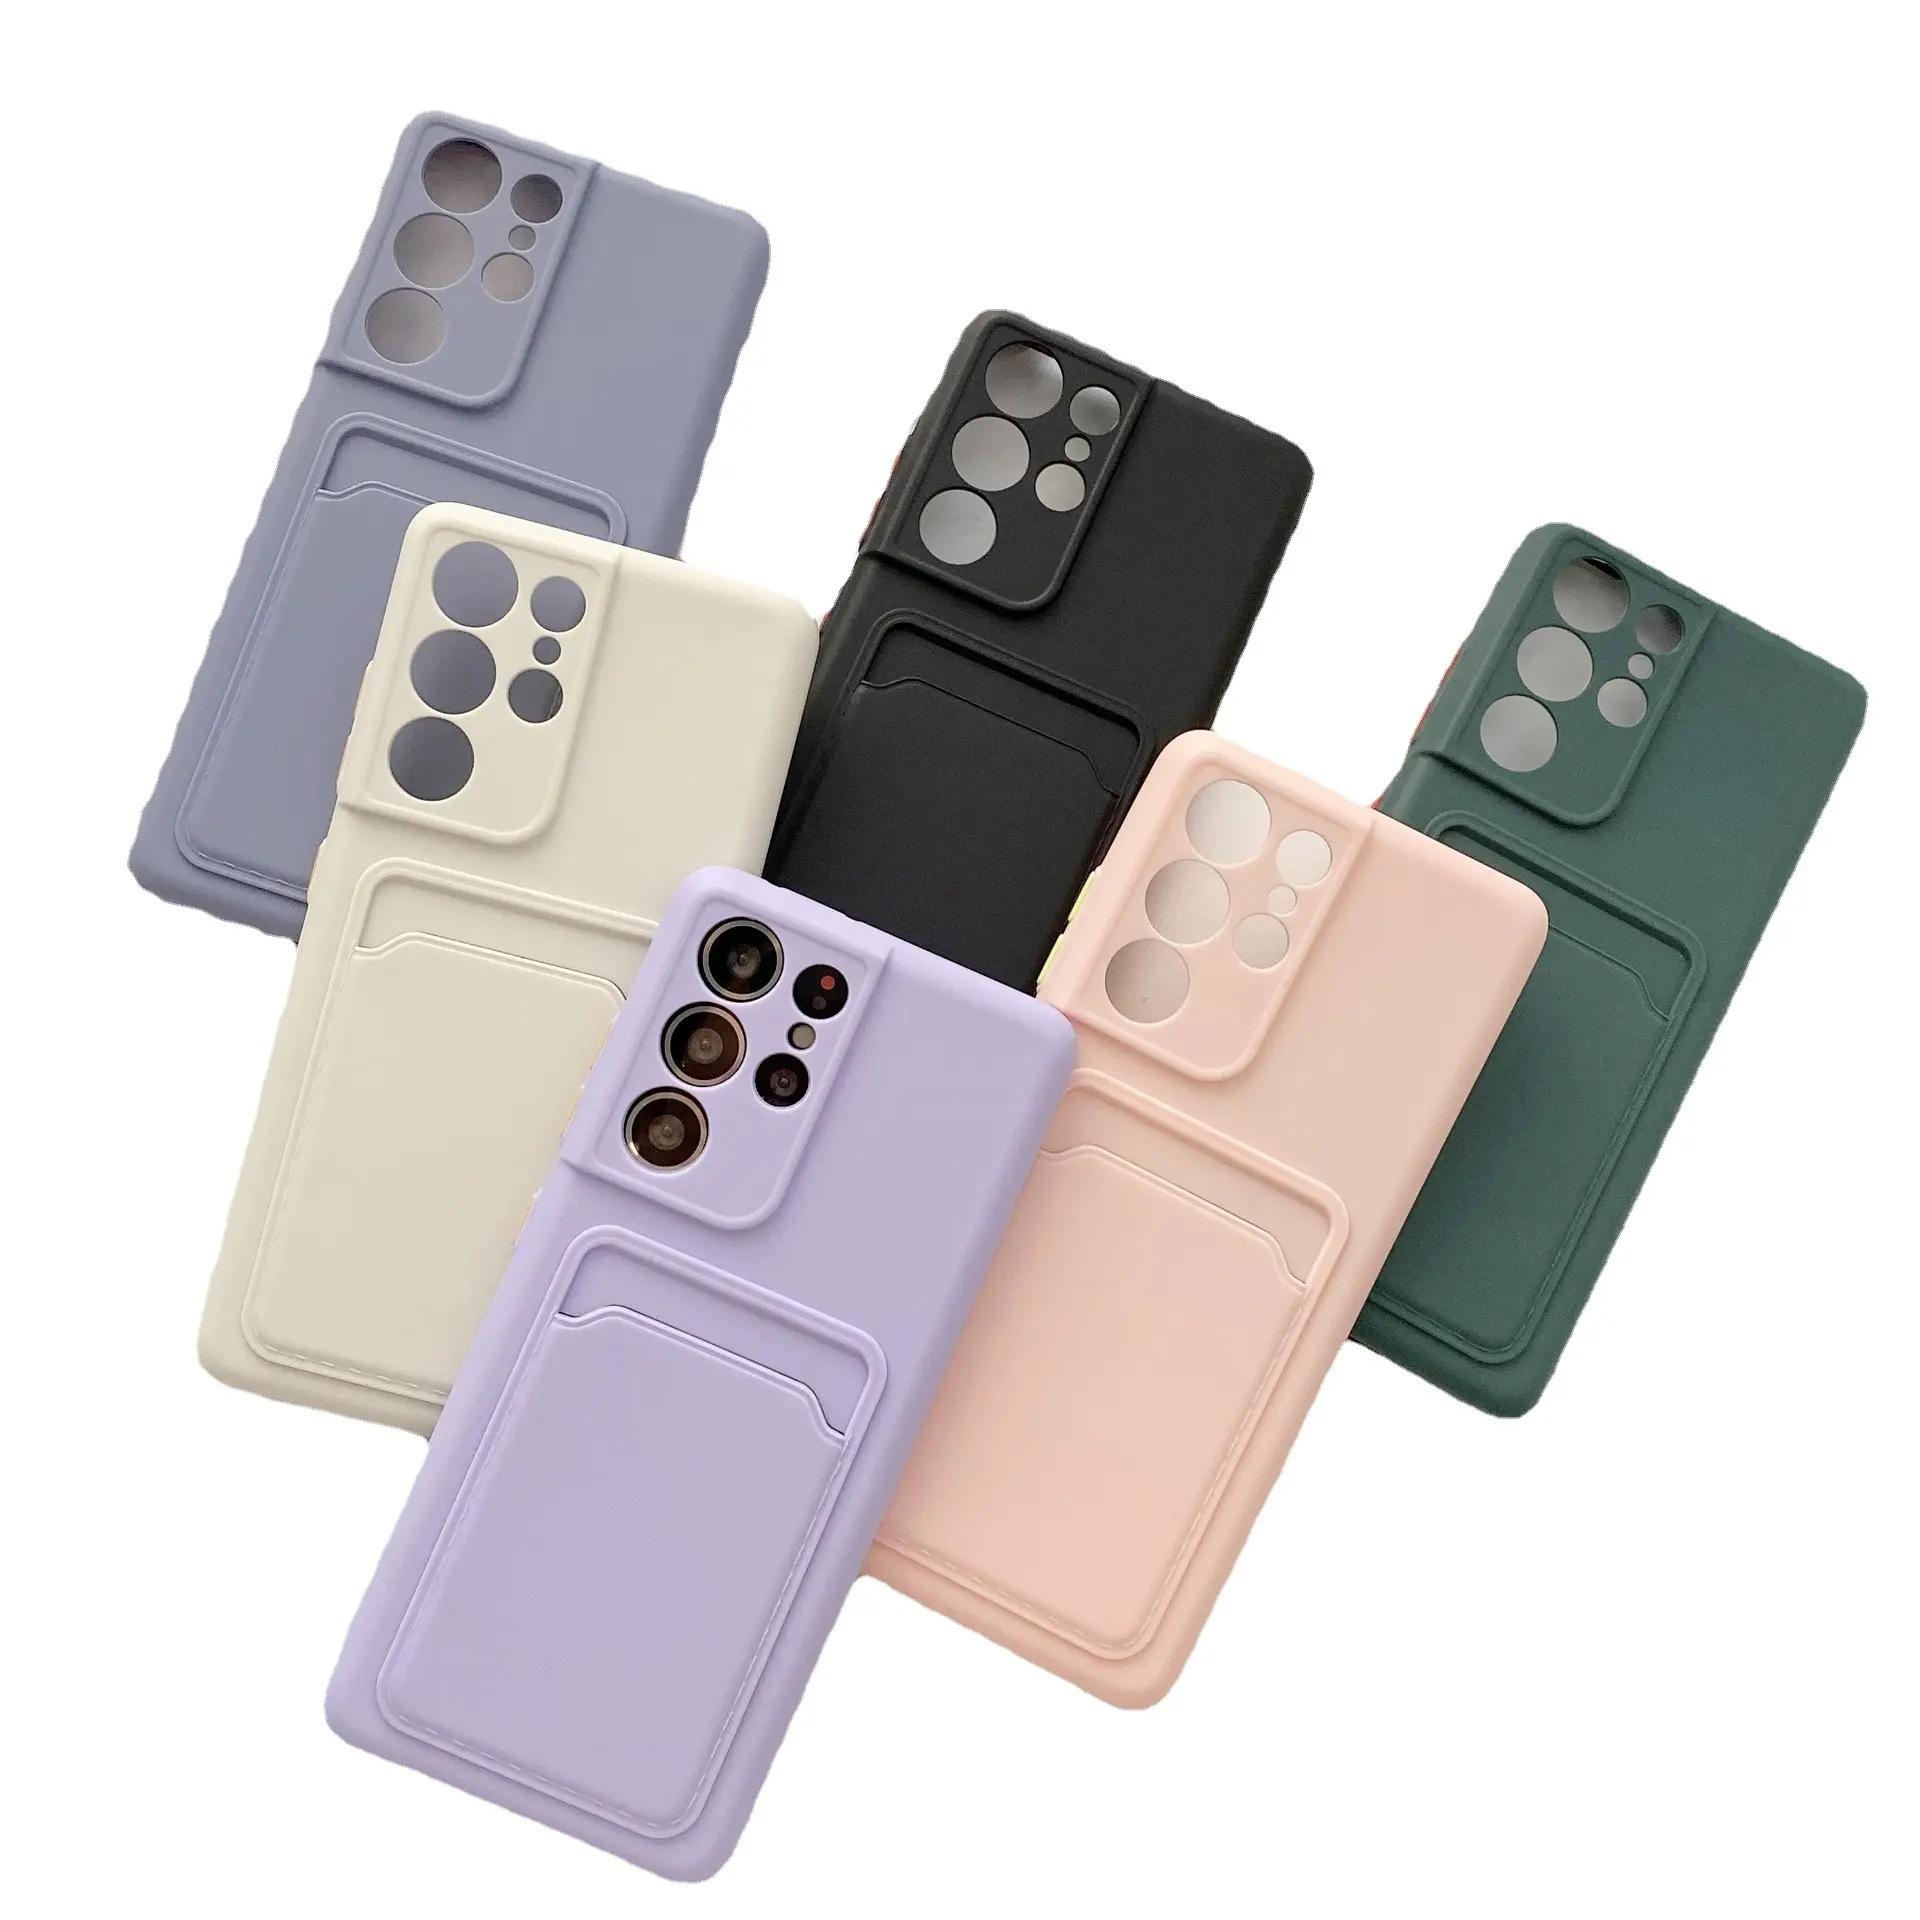 Silicone TPU Back Cover With Credit Card Holder Card Mobile Phone Case for Samsung A12 A32 A42 A52 A72 S20 S21 Plus Note 20